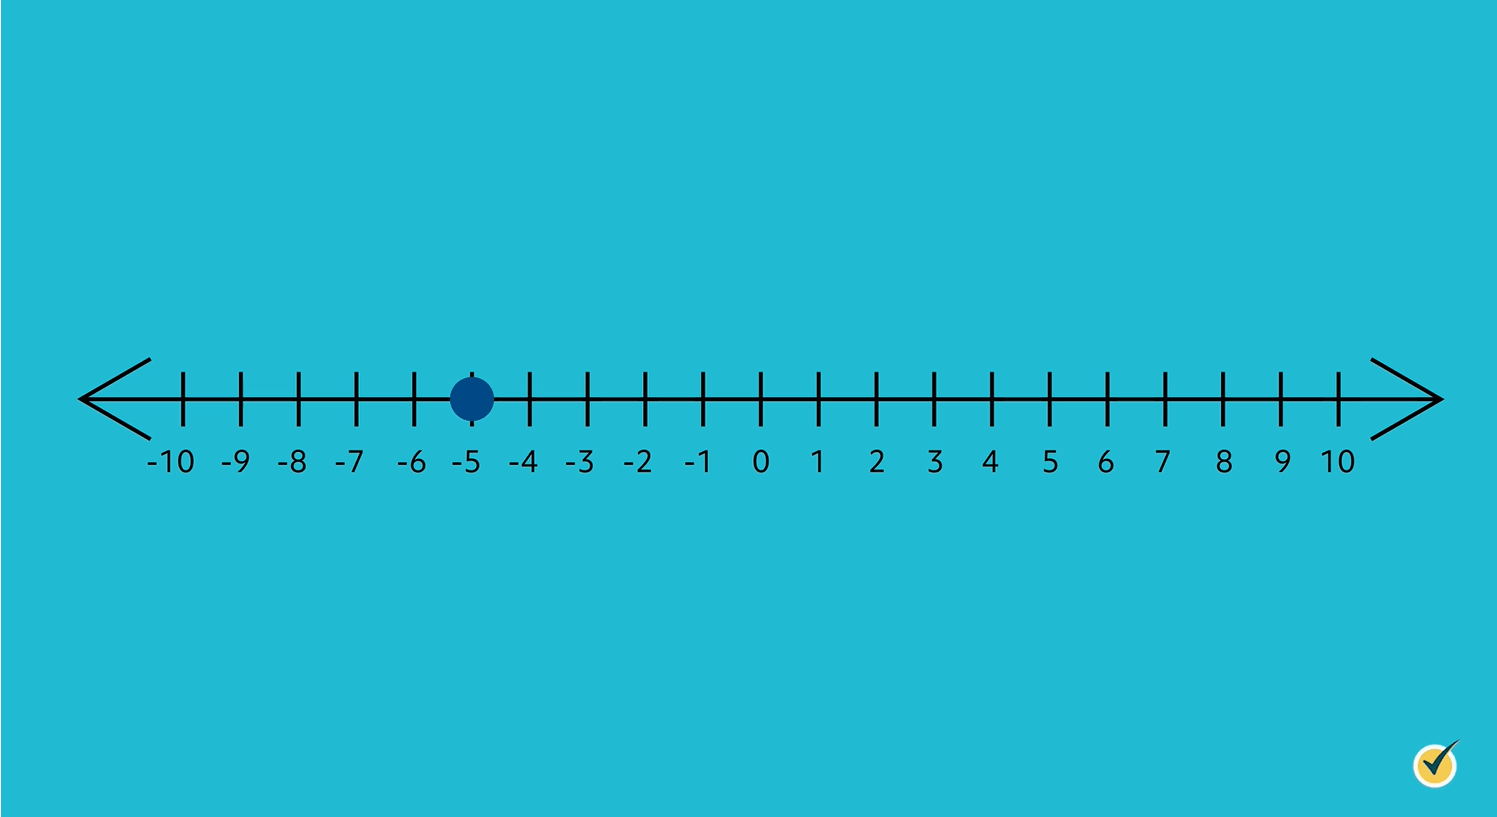 Number line with dot on -5